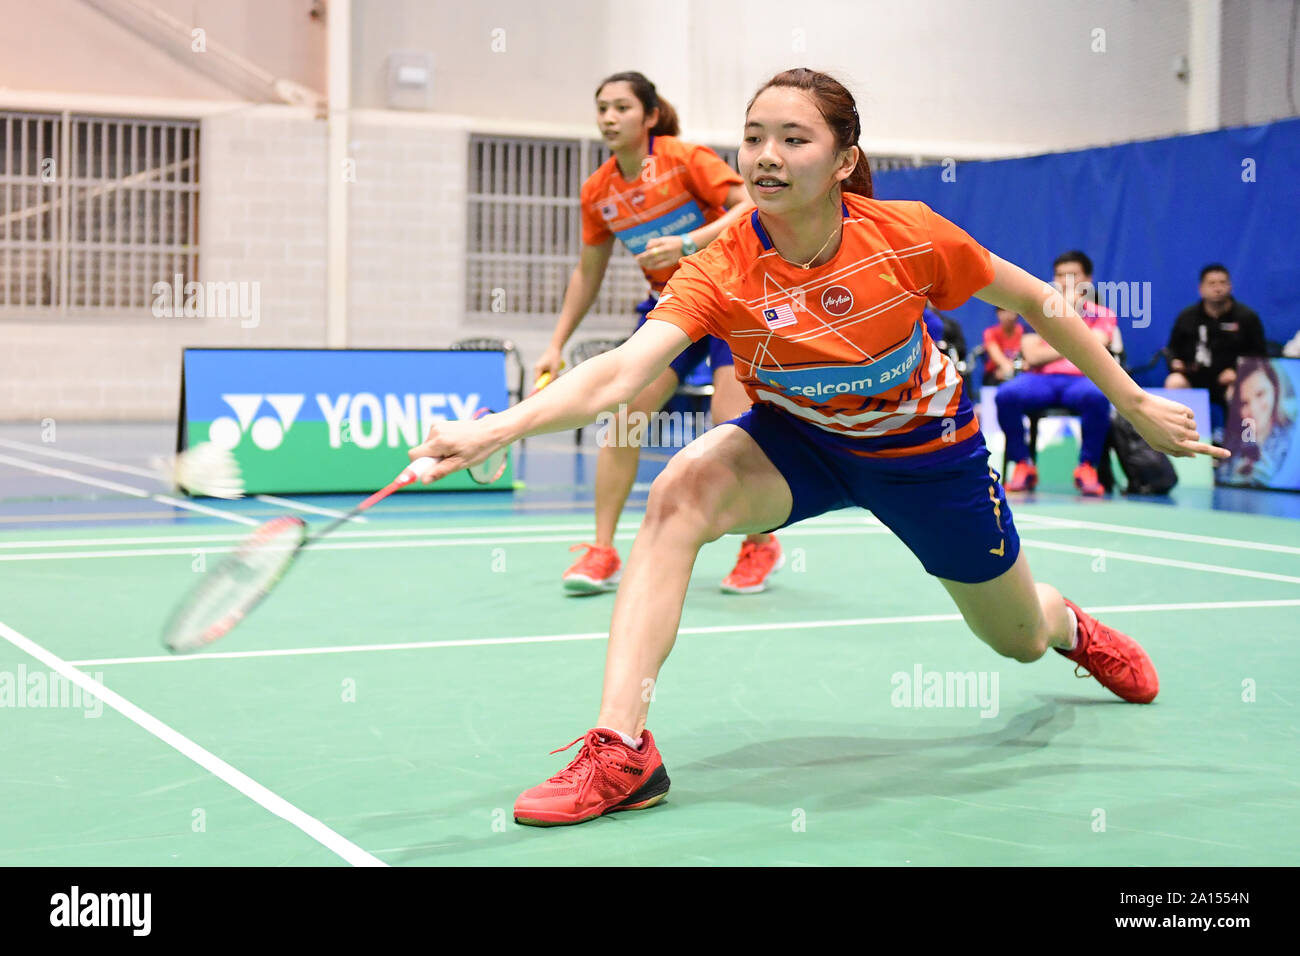 Teoh Mei Xing and Yap Ling (Malaysia) are seen in action during the 2019 Sydney International Women's Doubles Semi Finals match against Cheng Yu Chieh and Tseng Yu-Chi (Chinese Taipei).  Teoh and Yap lost the match, 21-19, 21-18. Stock Photo